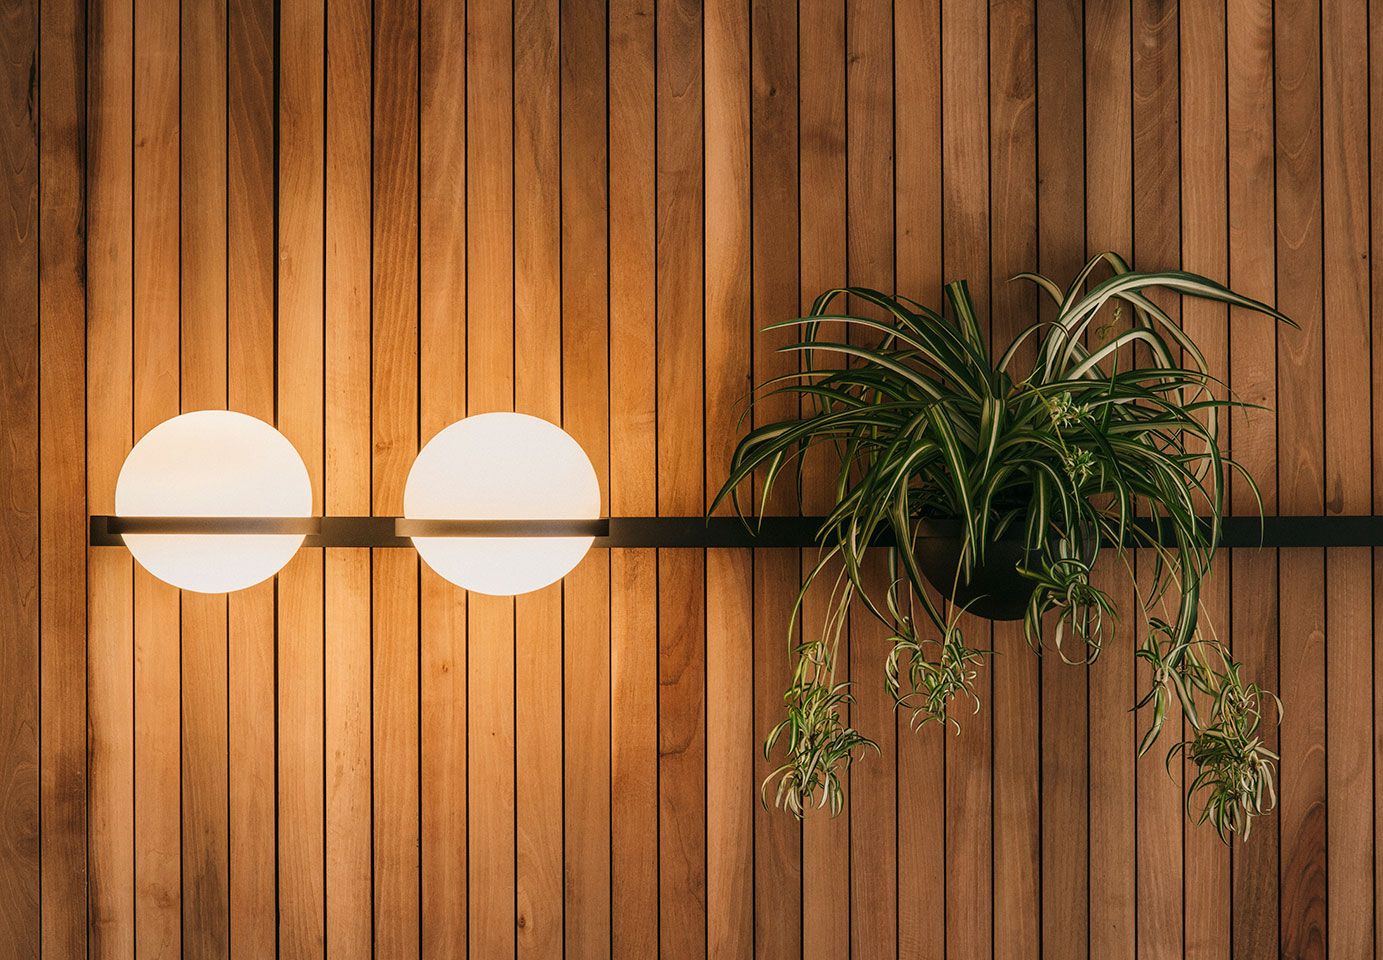 Vibia The Edit - The Palma Wall - Bringing the Outdoors In